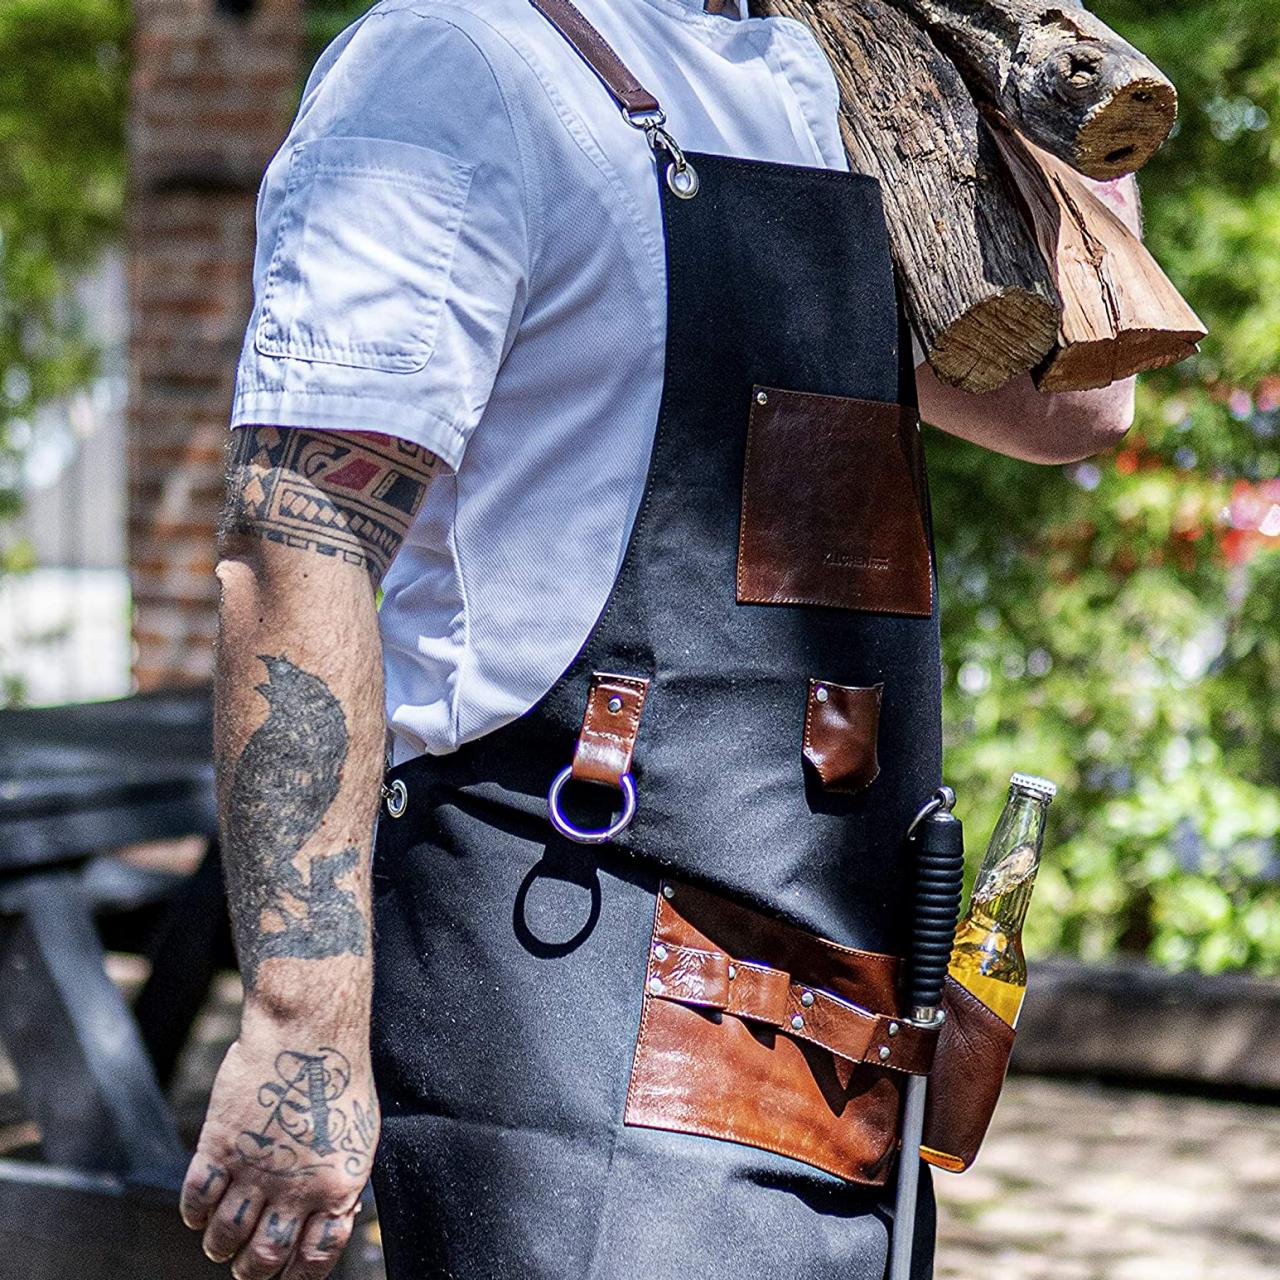 https://food.fnr.sndimg.com/content/dam/images/food/products/2022/10/25/rx_kitchen-for-pros-genuine-leather-chef-apron.jpeg.rend.hgtvcom.1280.1280.suffix/1666722372377.jpeg